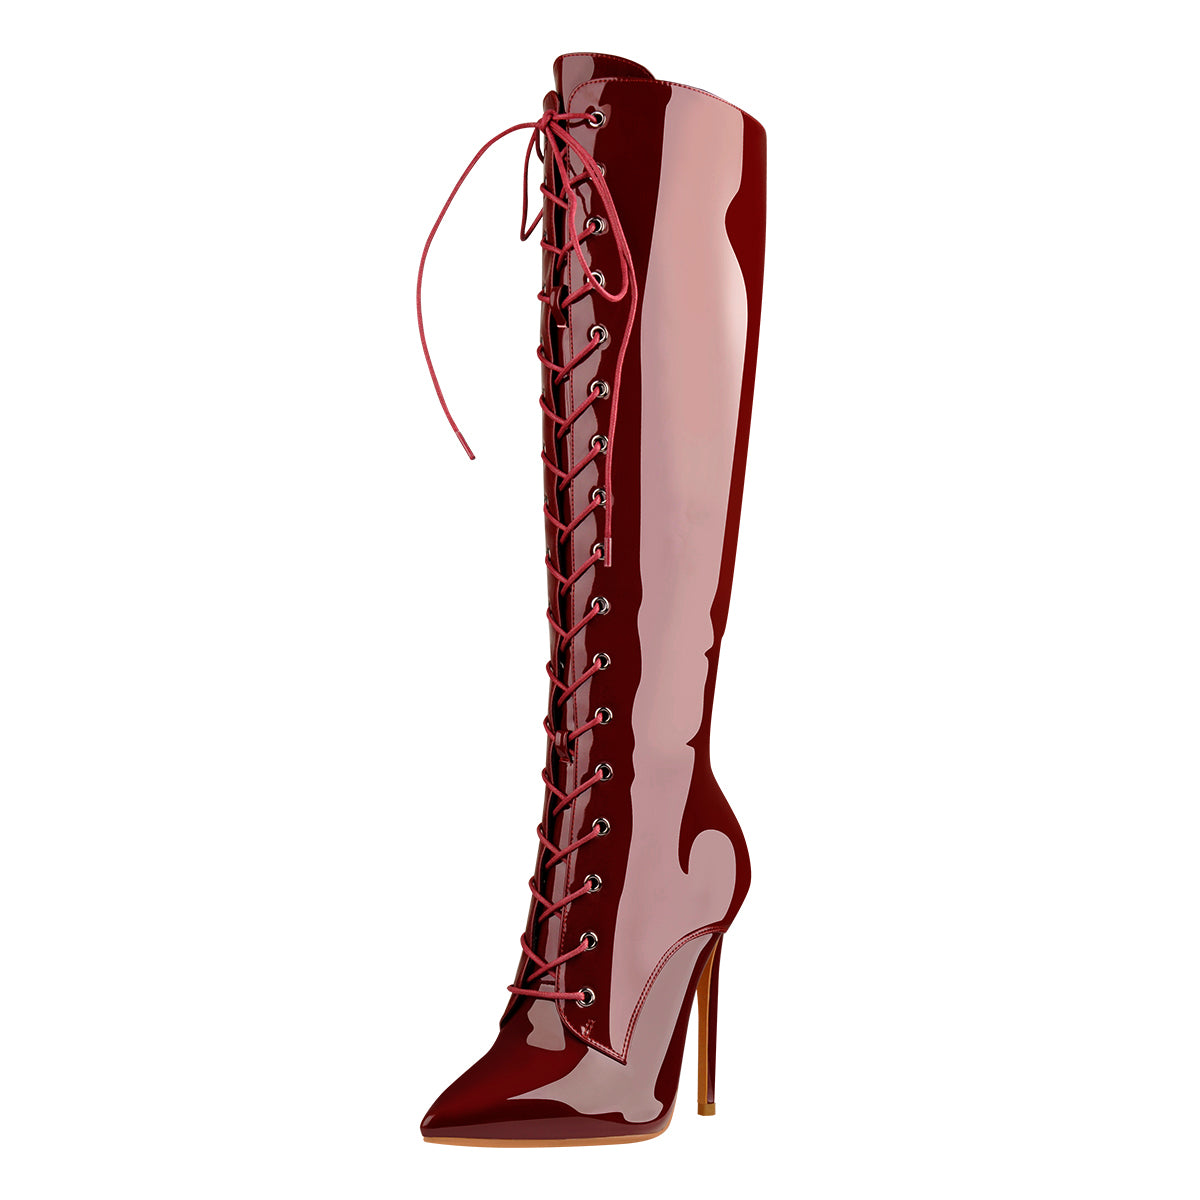 Red Patent Leather Lace Up Pointed Toe Knee High Boots Onlymaker 1569